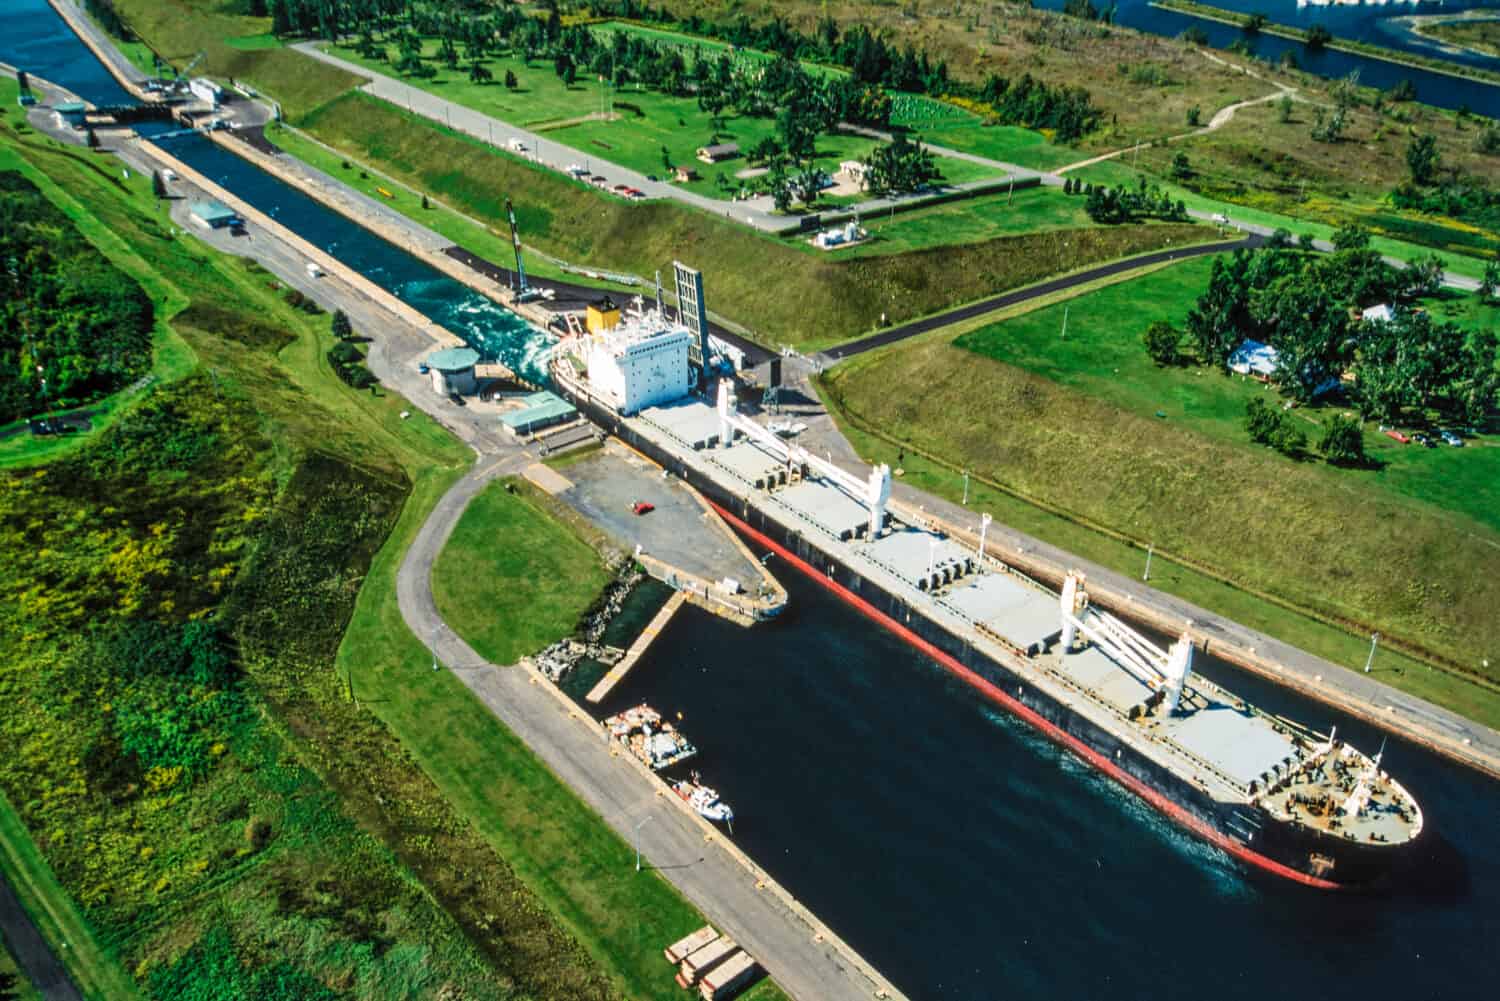 Aerial image of St. Lawrence Seaway, Ontario, Canada